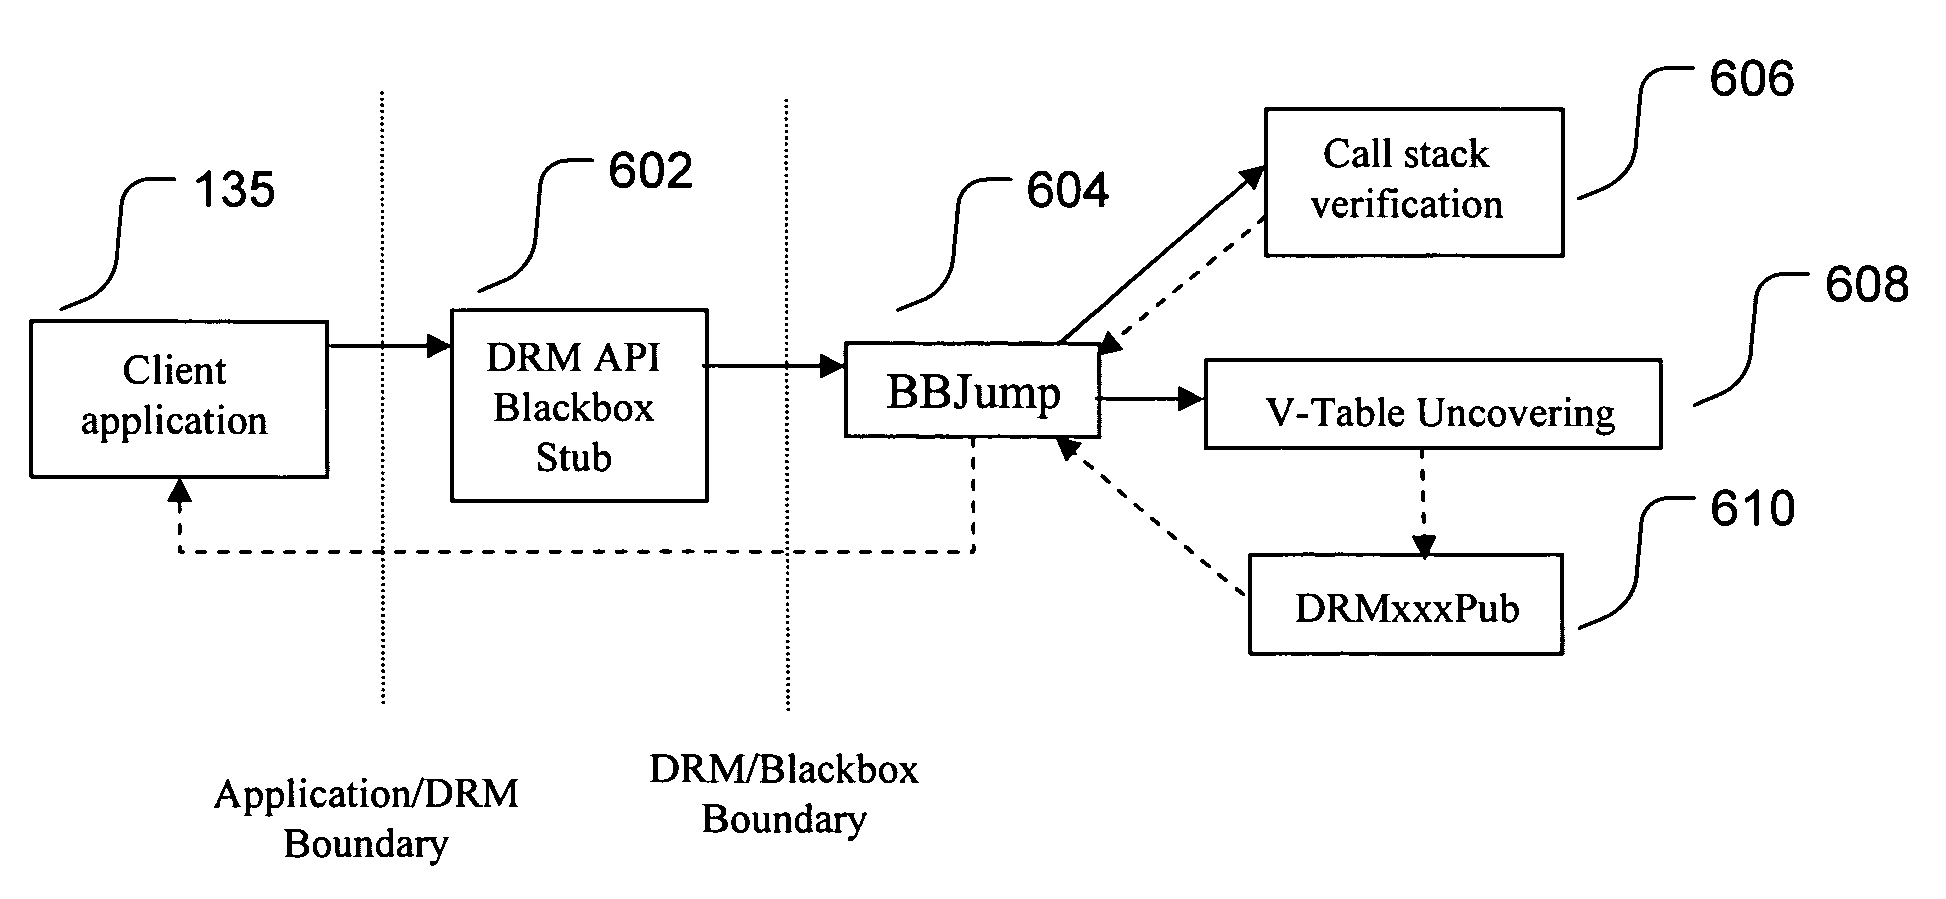 Run-time call stack verification